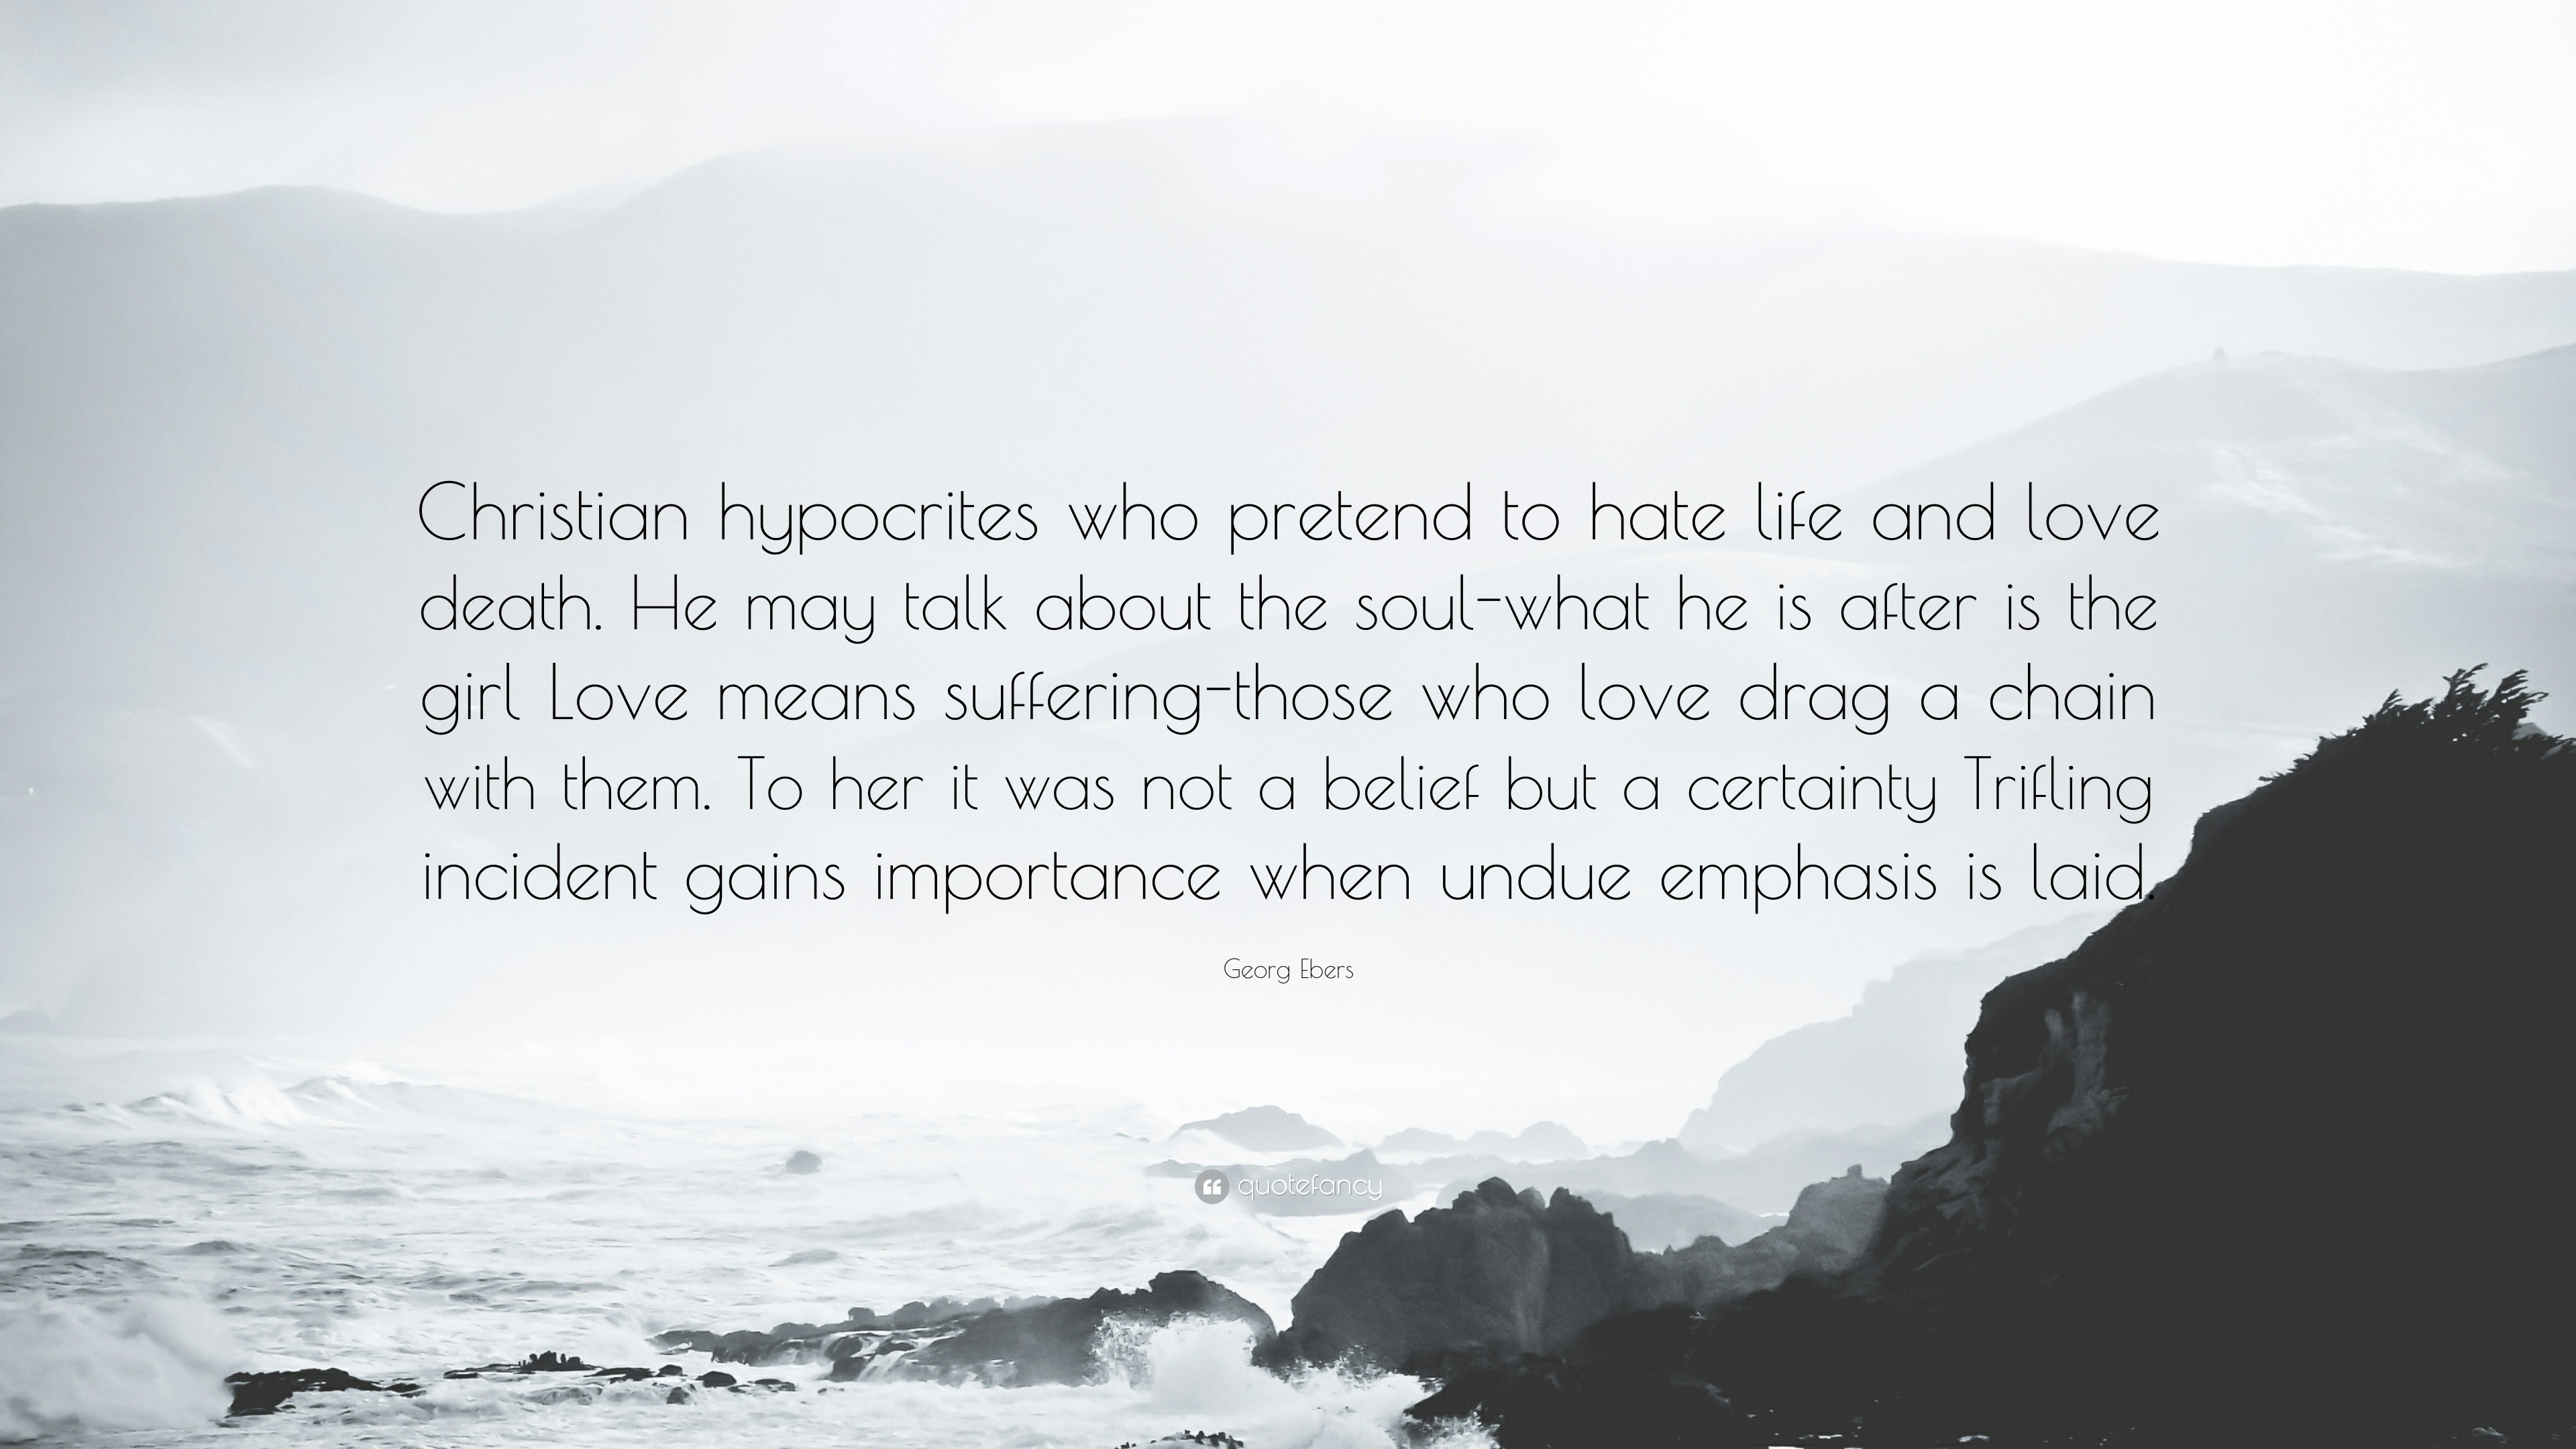 Georg Ebers Quote “Christian hypocrites who pretend to hate life and love